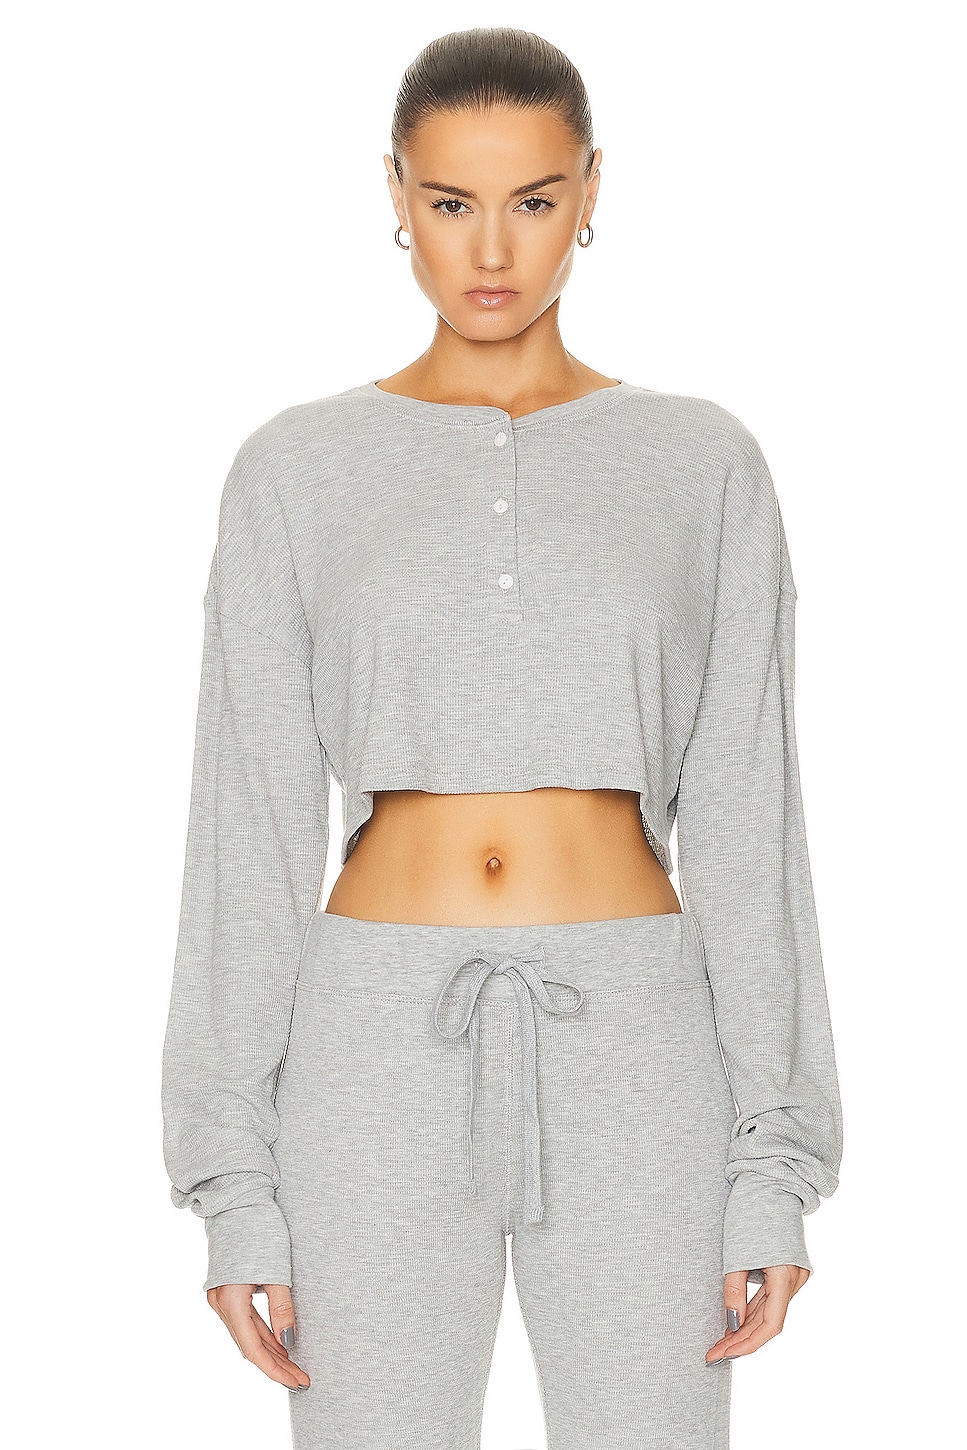 Image 1 of Eterne Cropped Thermal Henley Top in Heather Grey